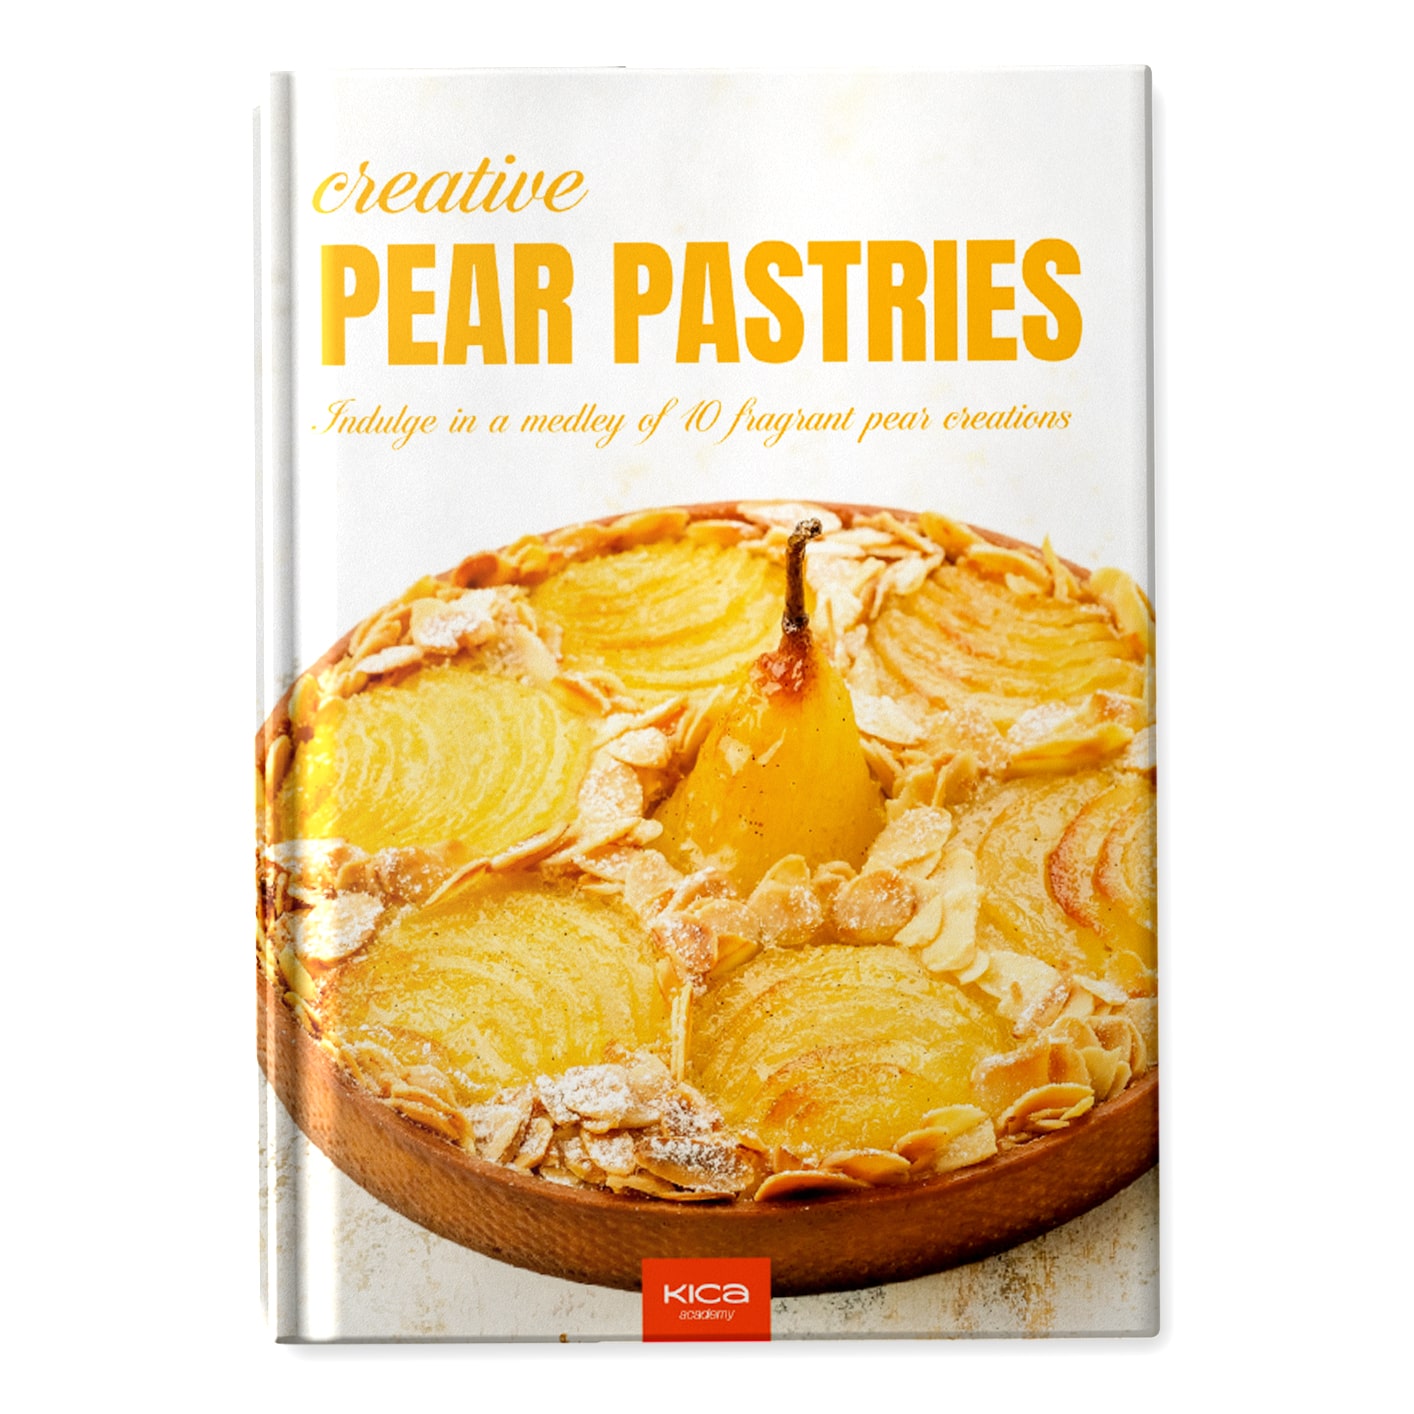 Creative Pear Pastries: Indulge in a Medley of 10 Fragrant Pear Creations